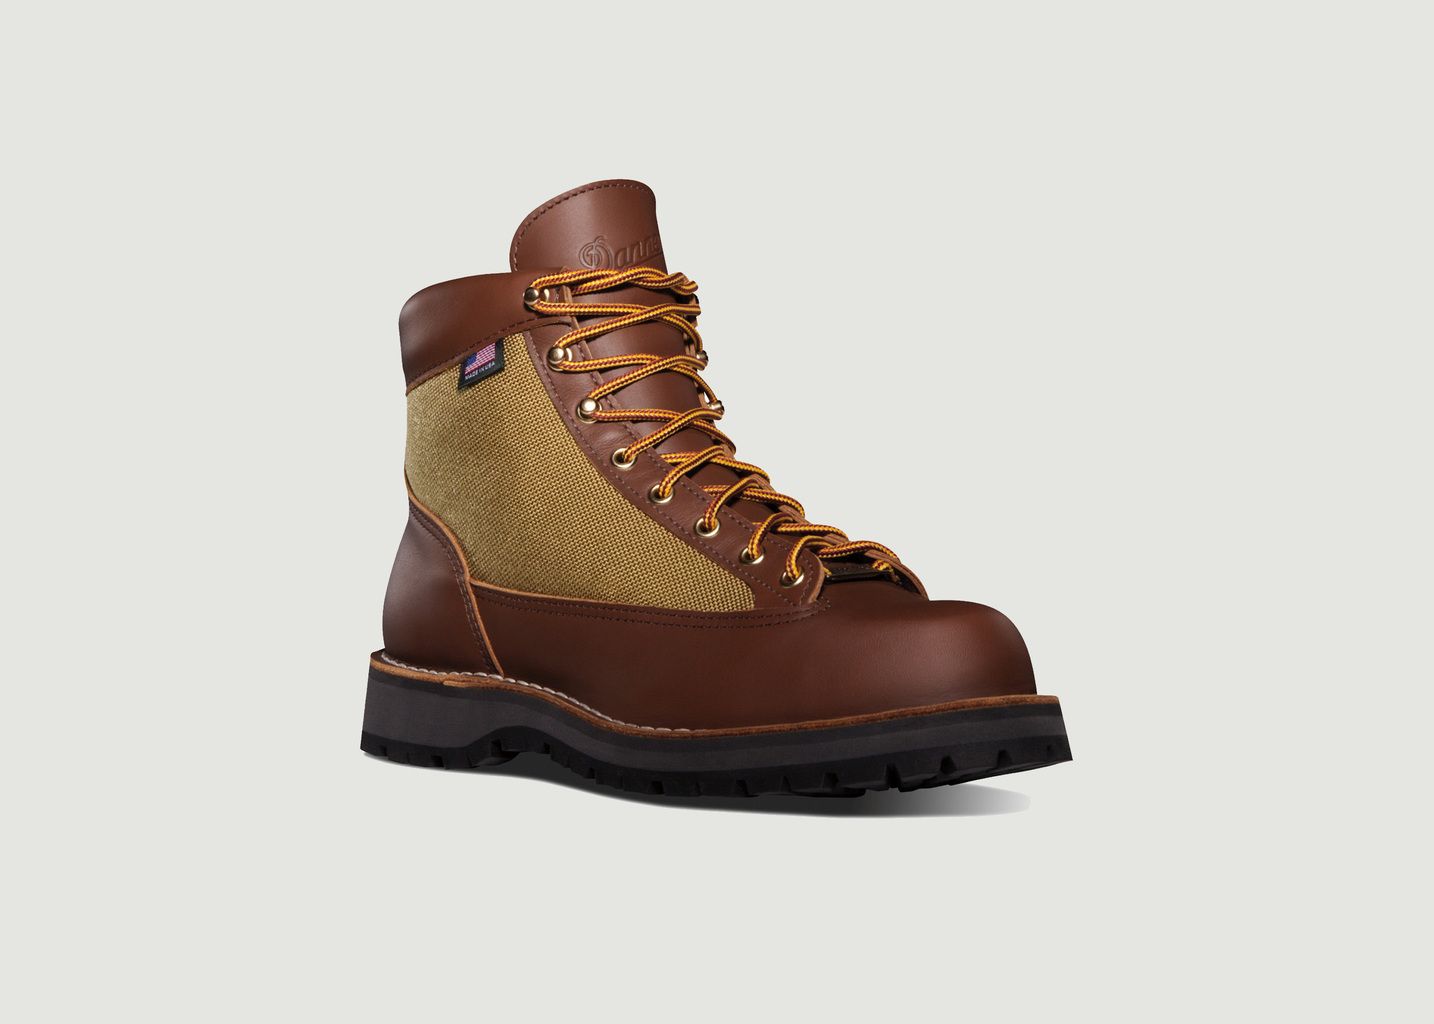 Danner Light fabric and leather boots 